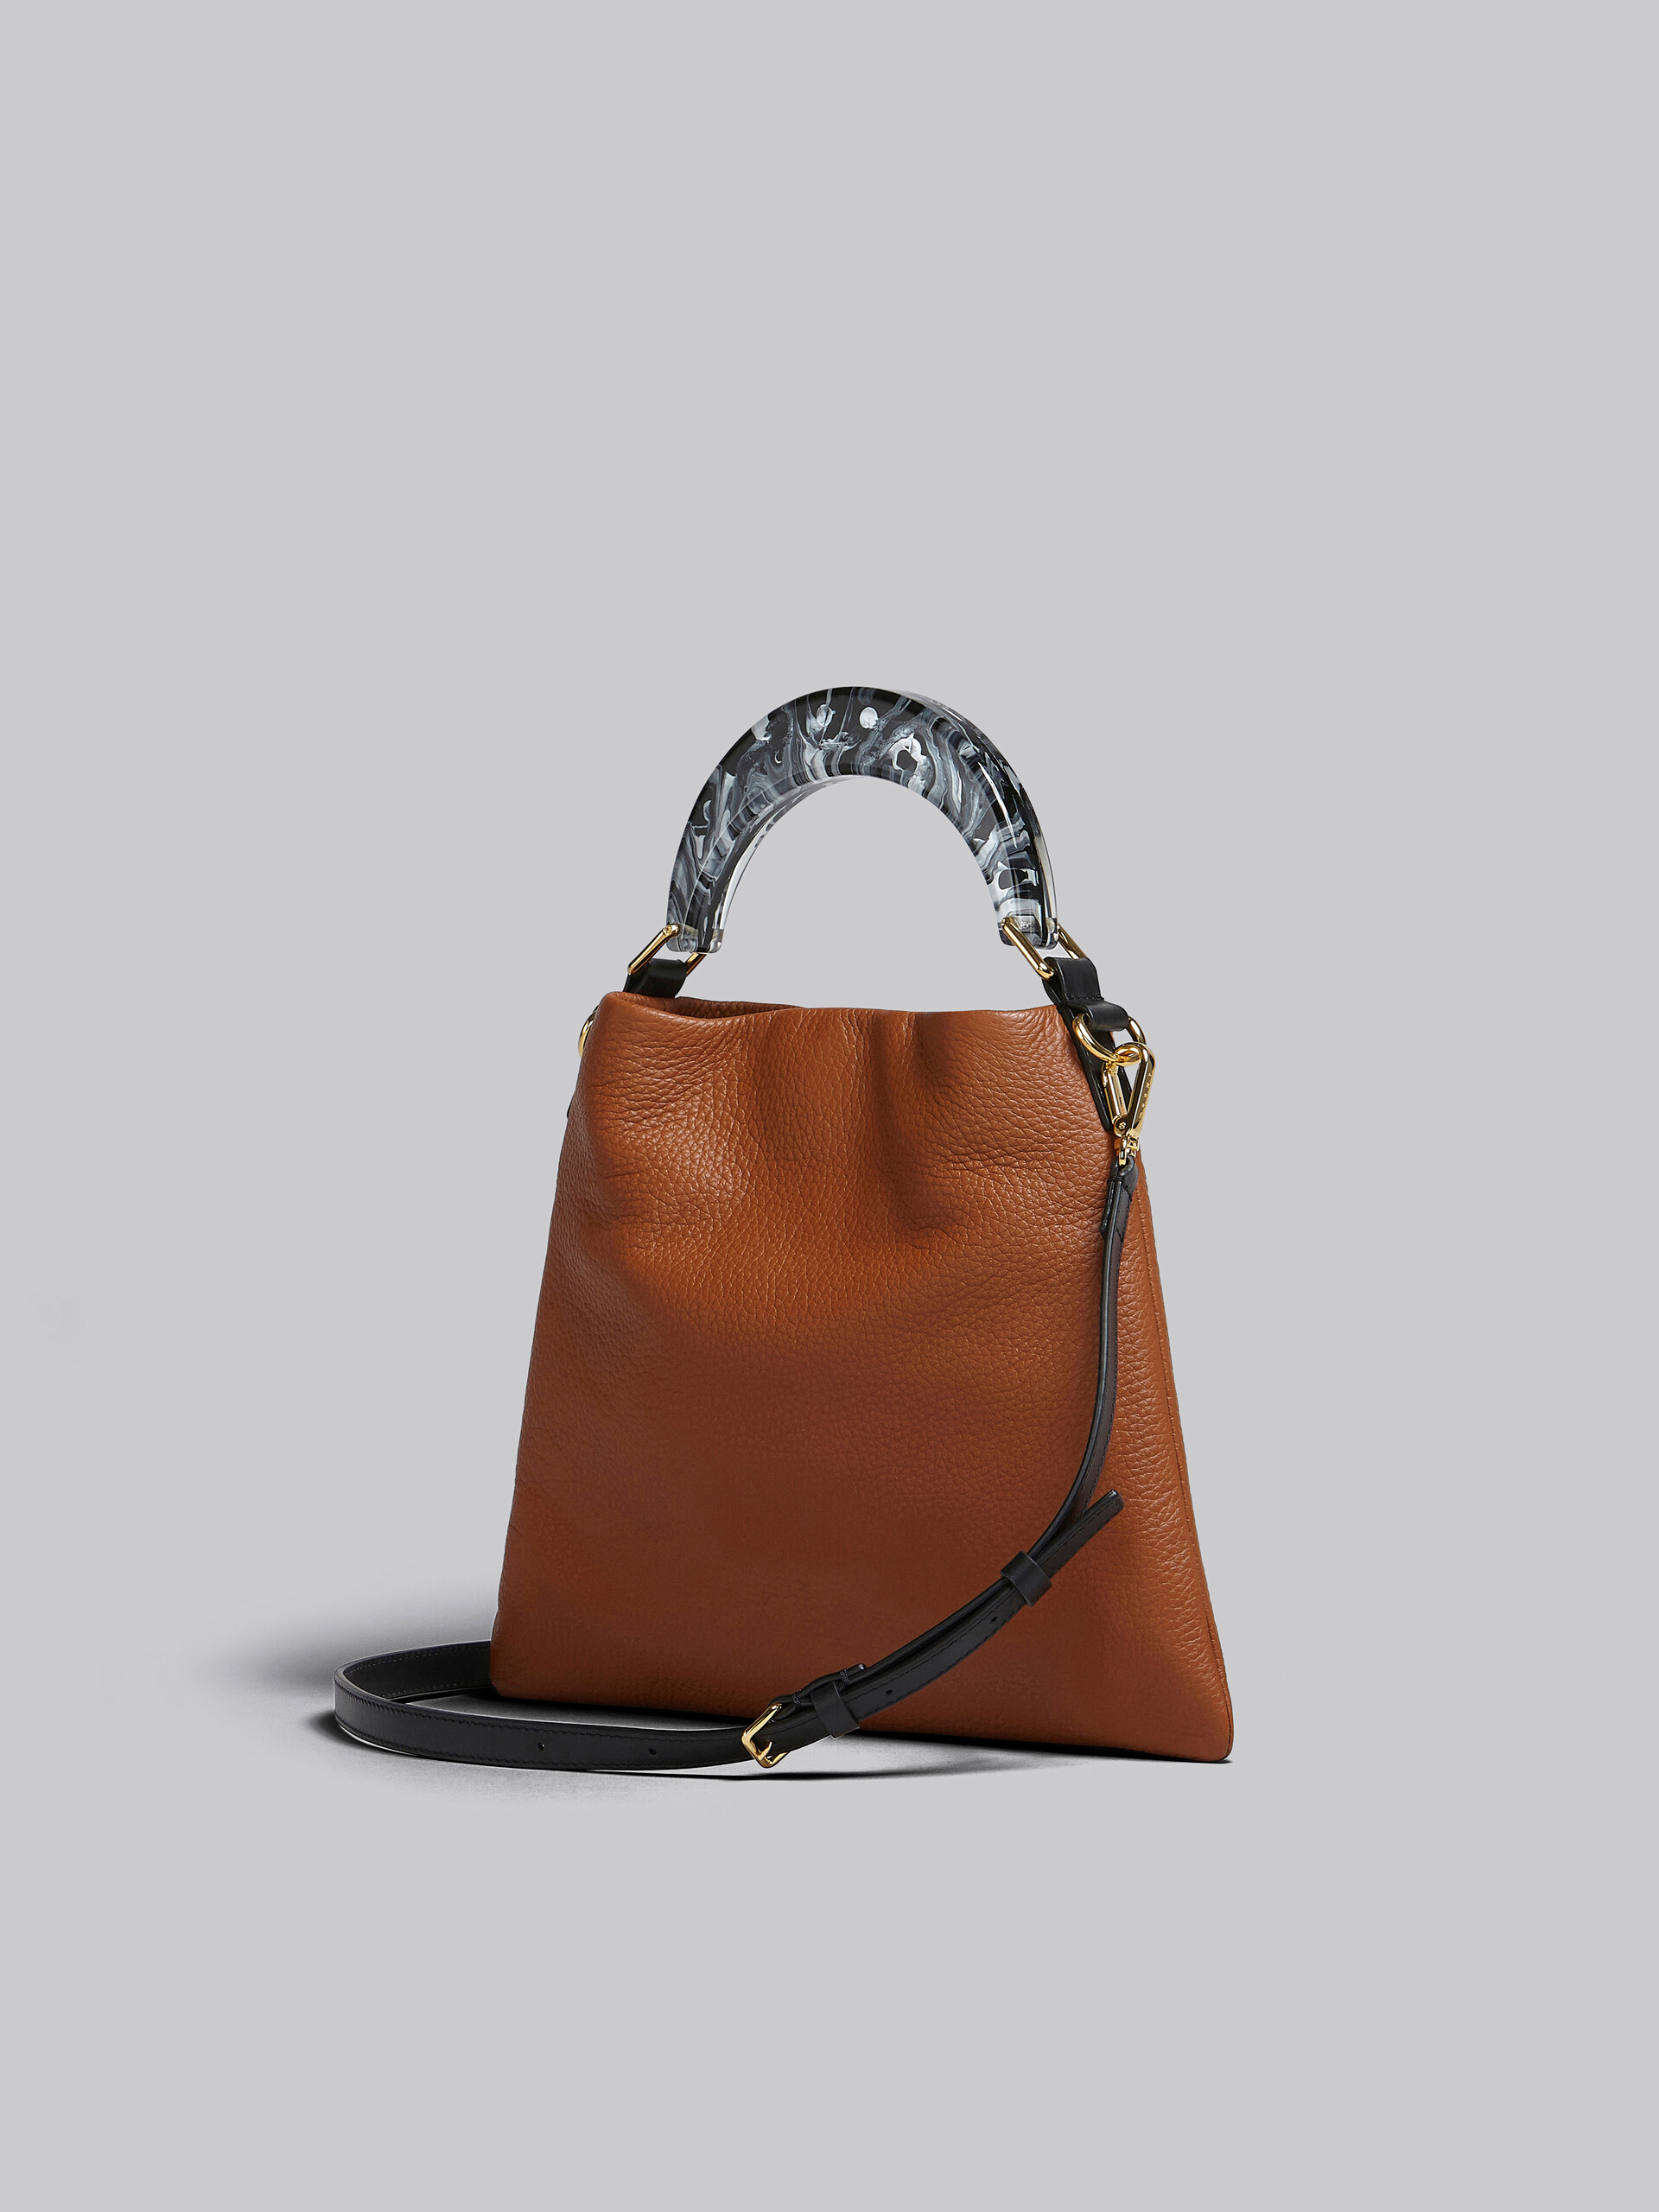 Venice small bag in brown leather - Shoulder Bags - Image 3